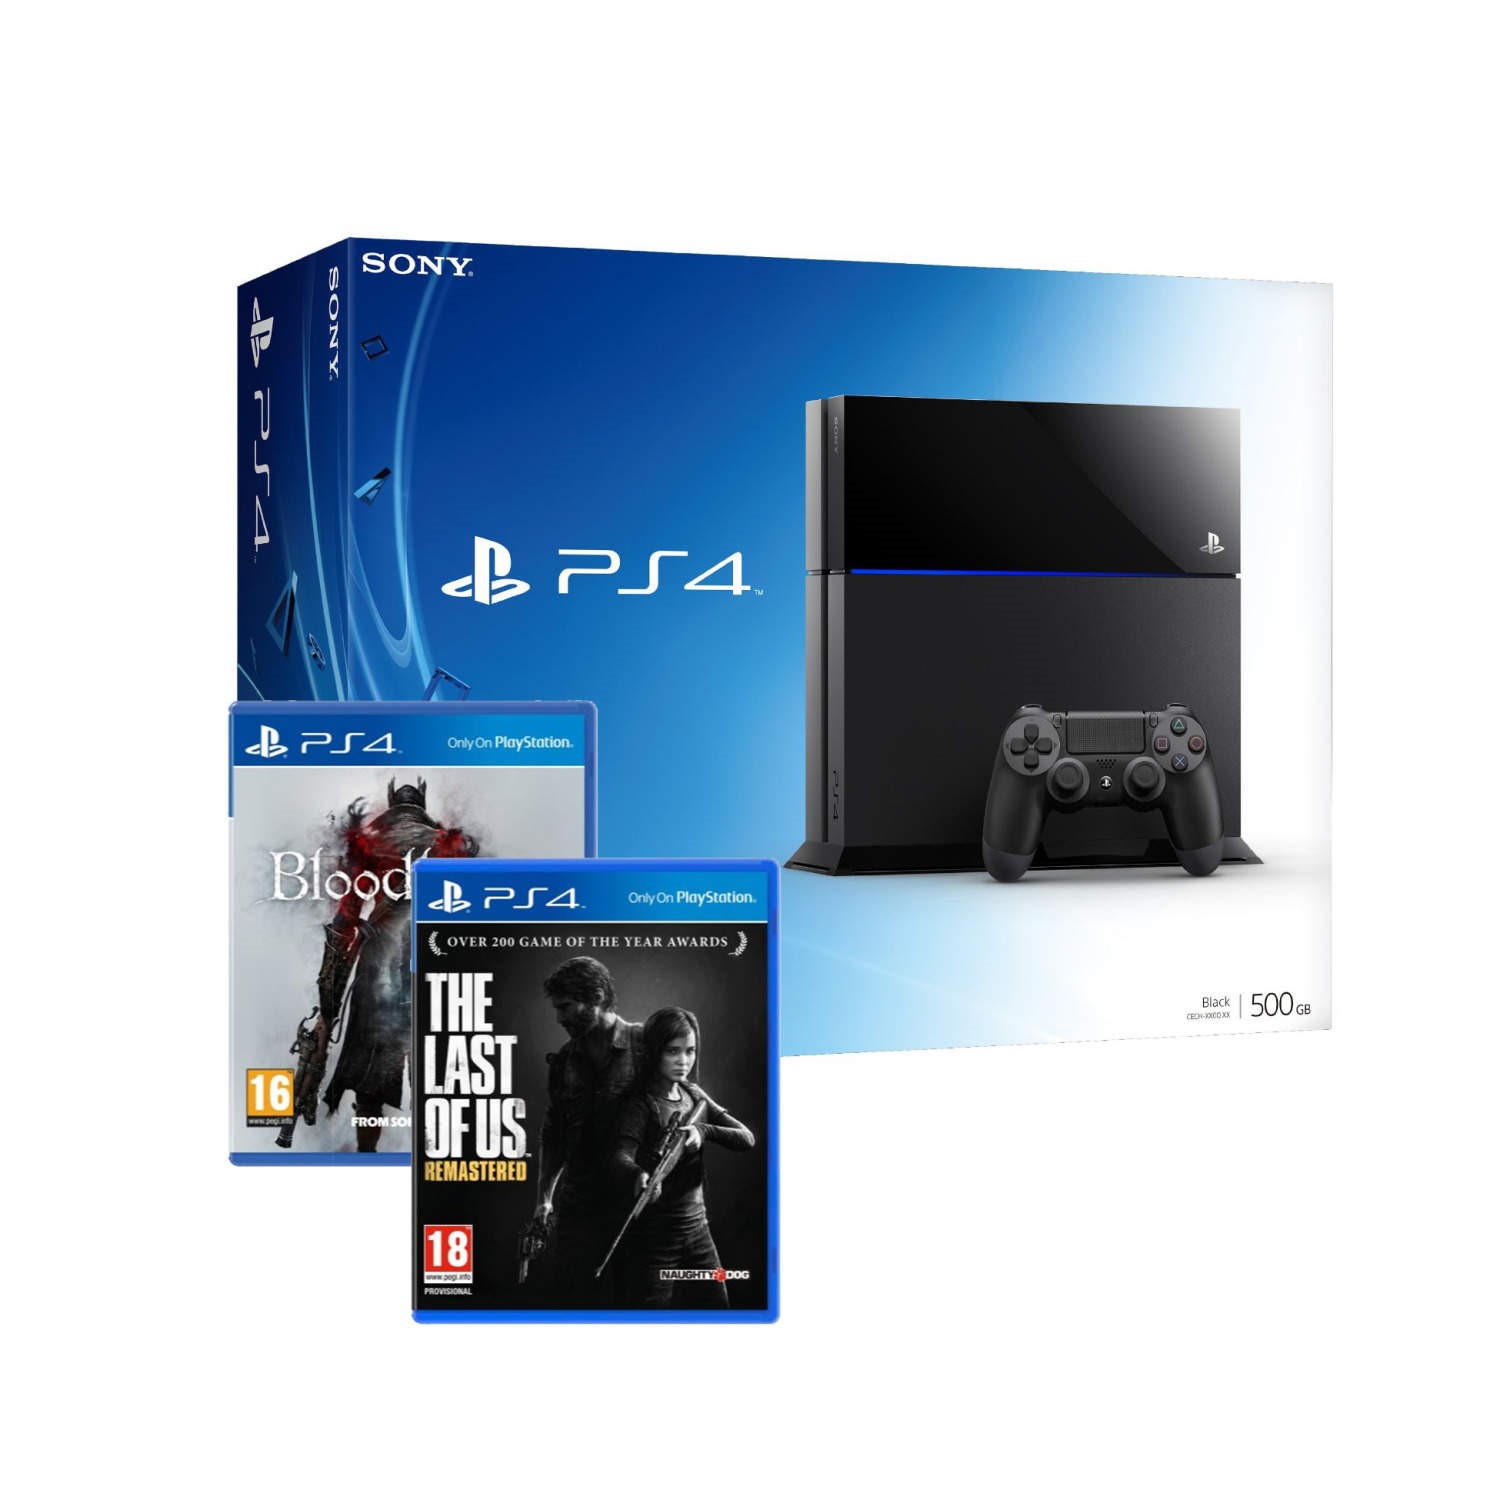 Sony Playstation 4 500GB Console with The Last of Us and Bloodborne bundle  - Laptops Direct